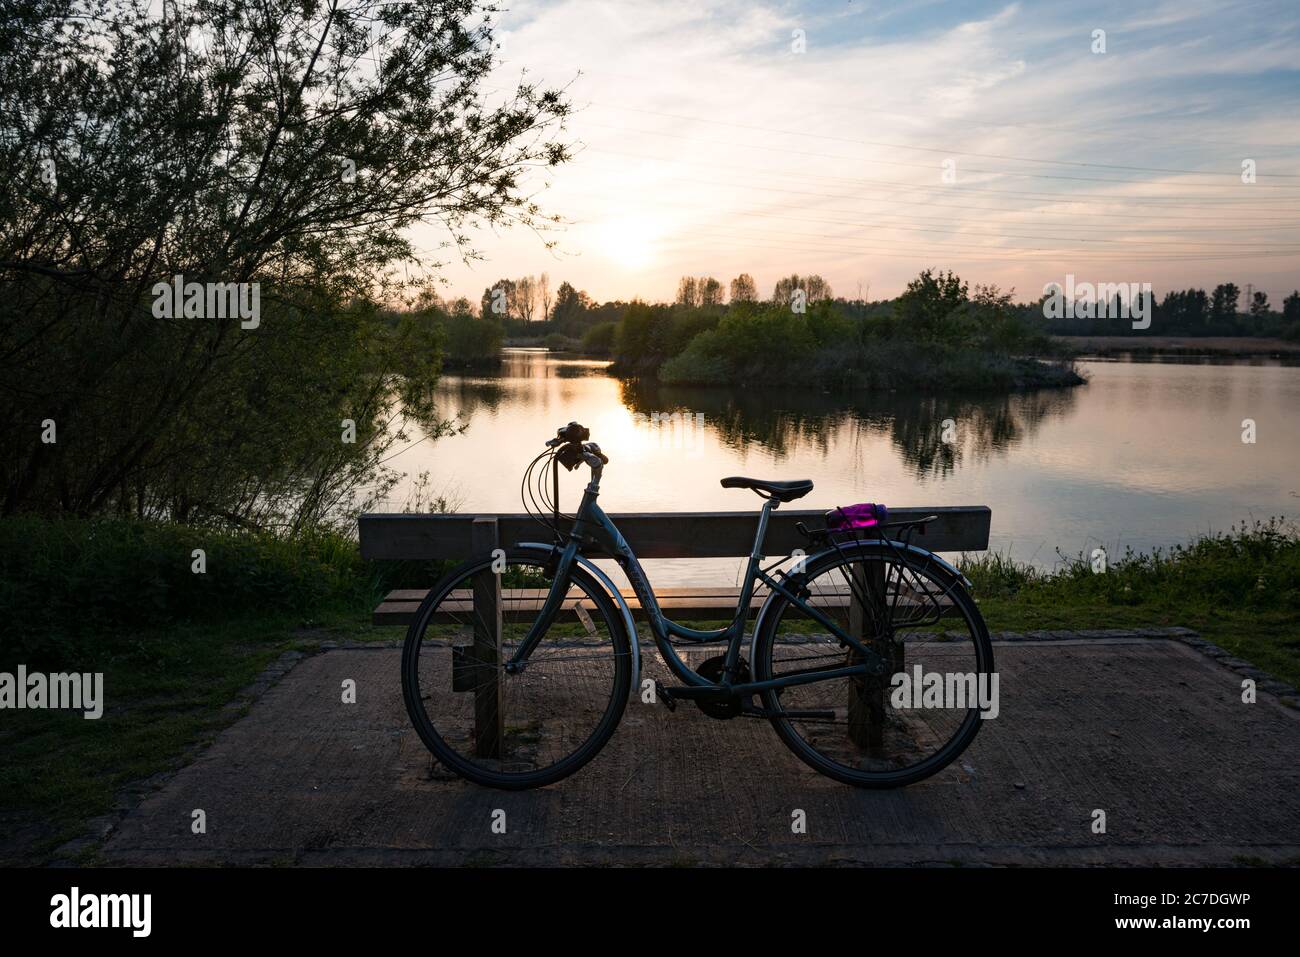 A bike ride through the Lee Valley Country Park on the Essex/Hertfordshire border, England, UK Stock Photo